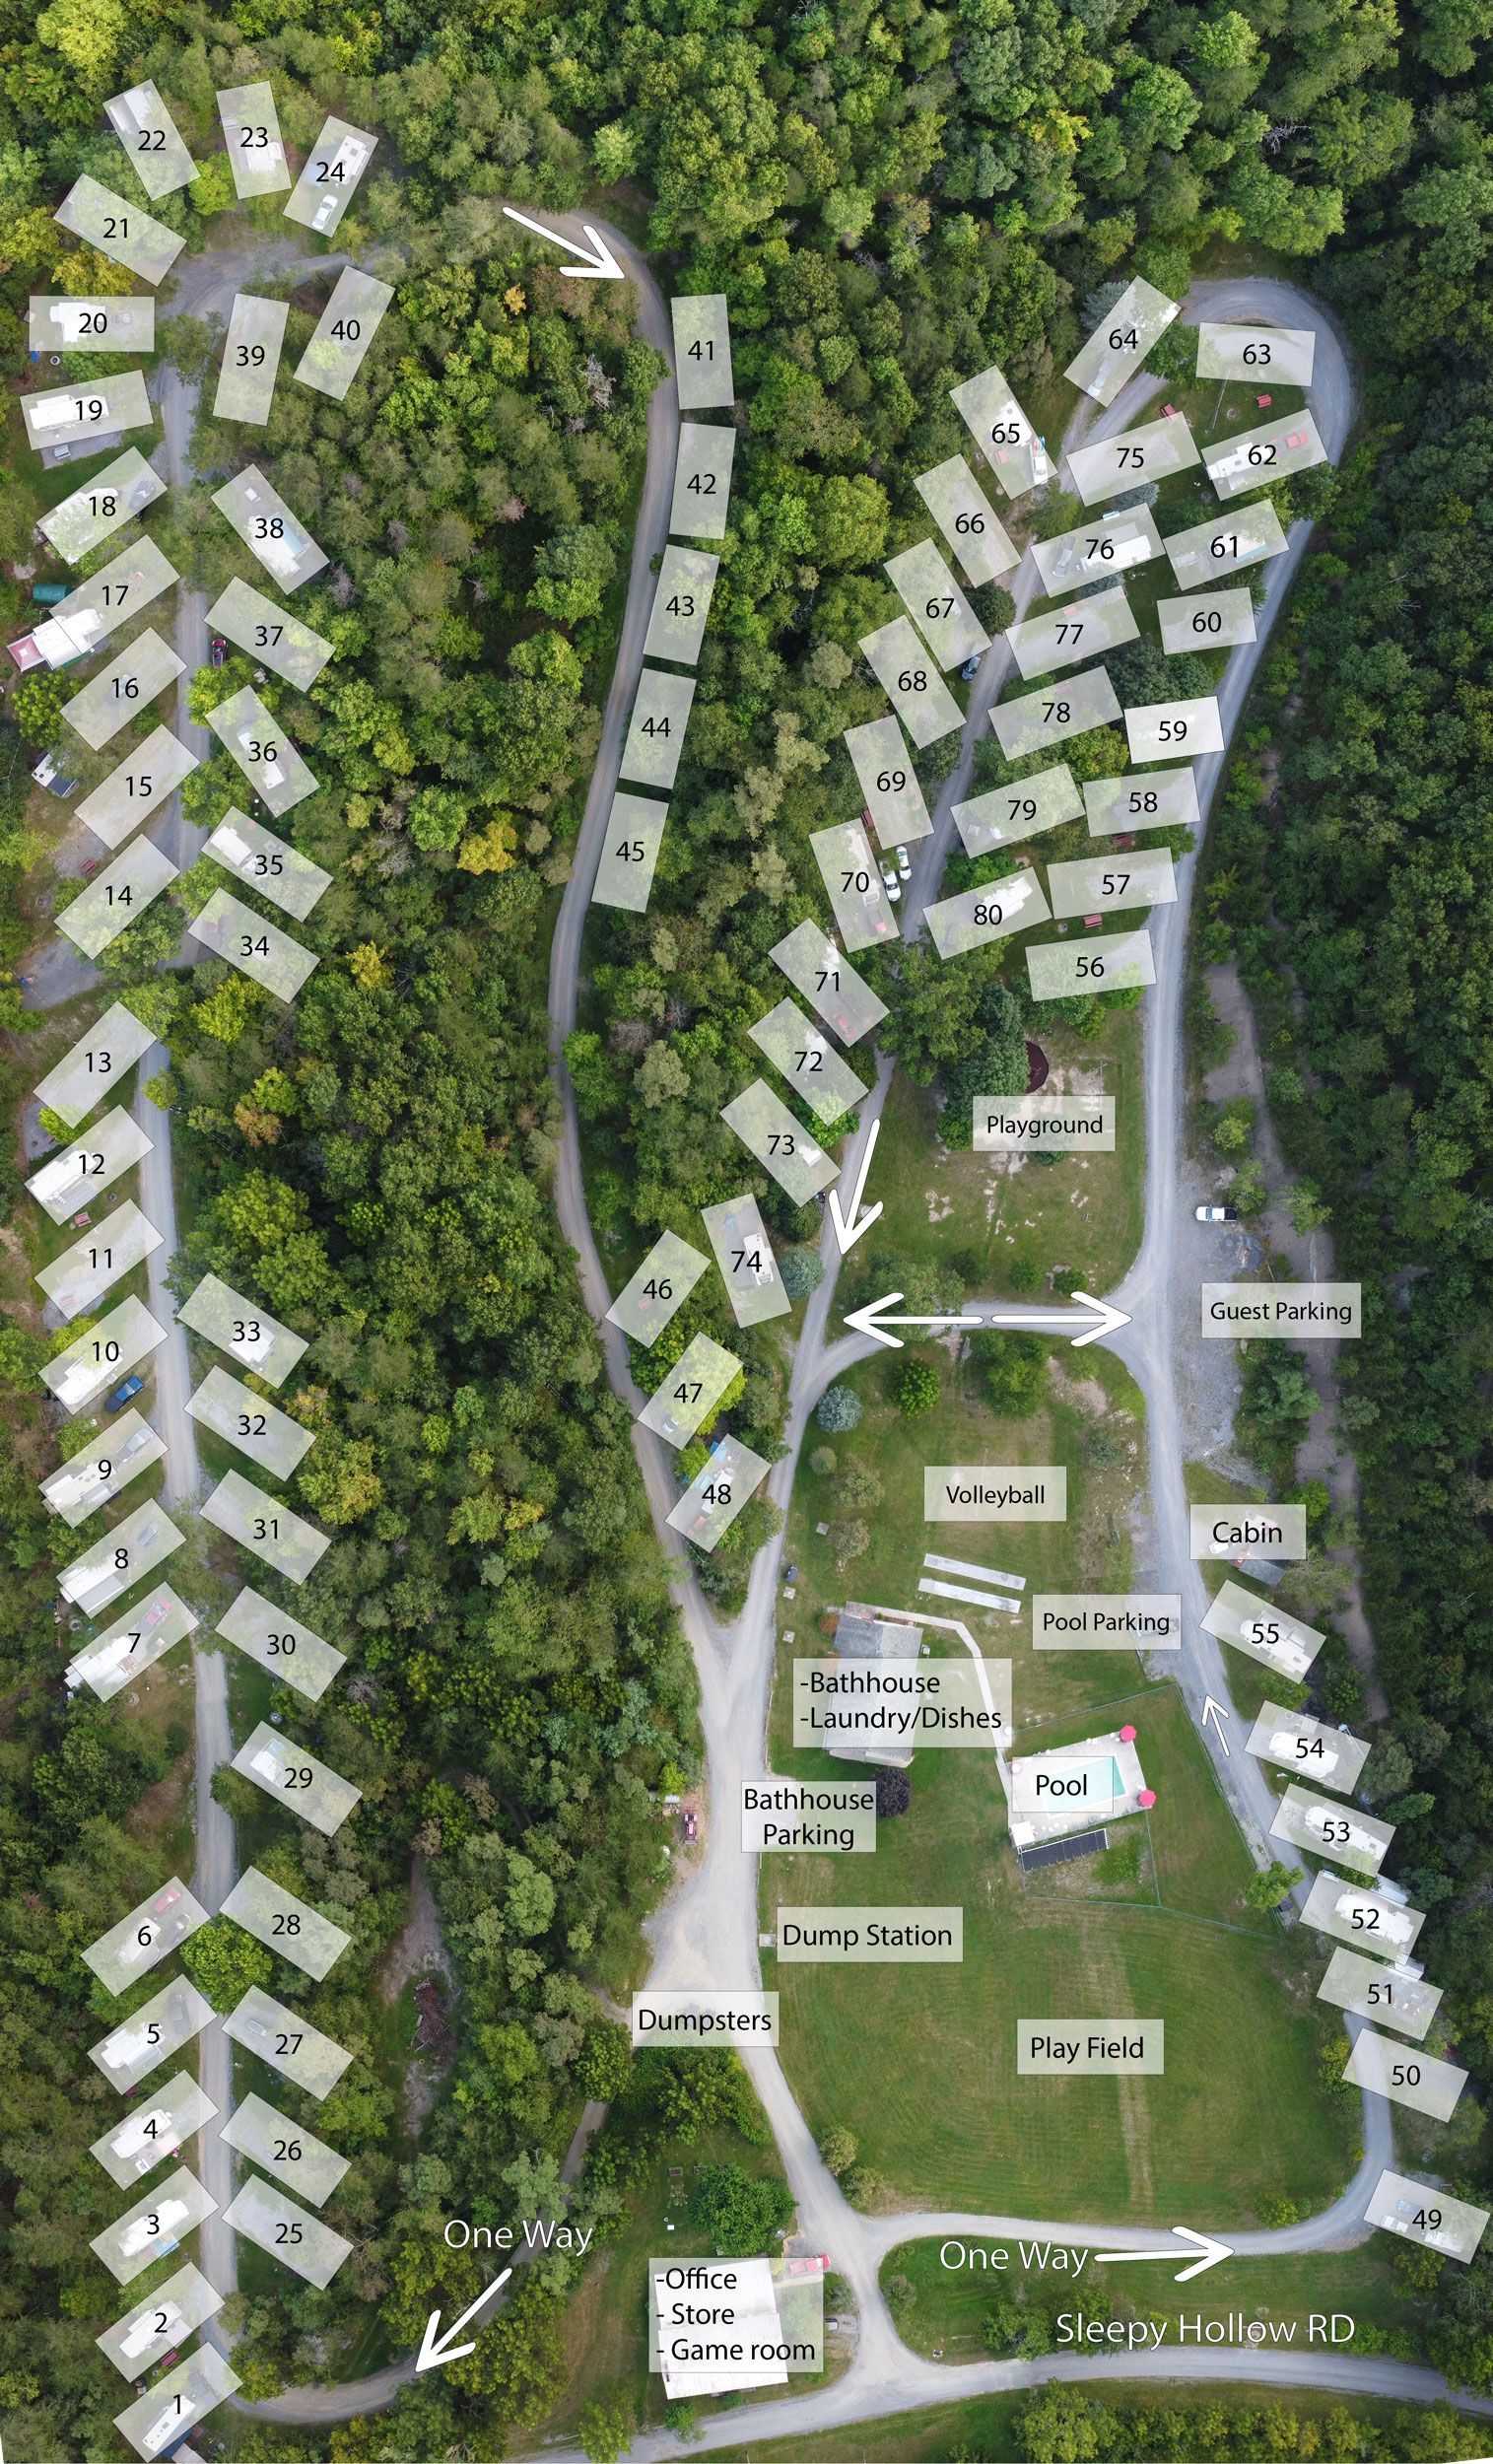 An aerial view of a campground surrounded by trees and grass.